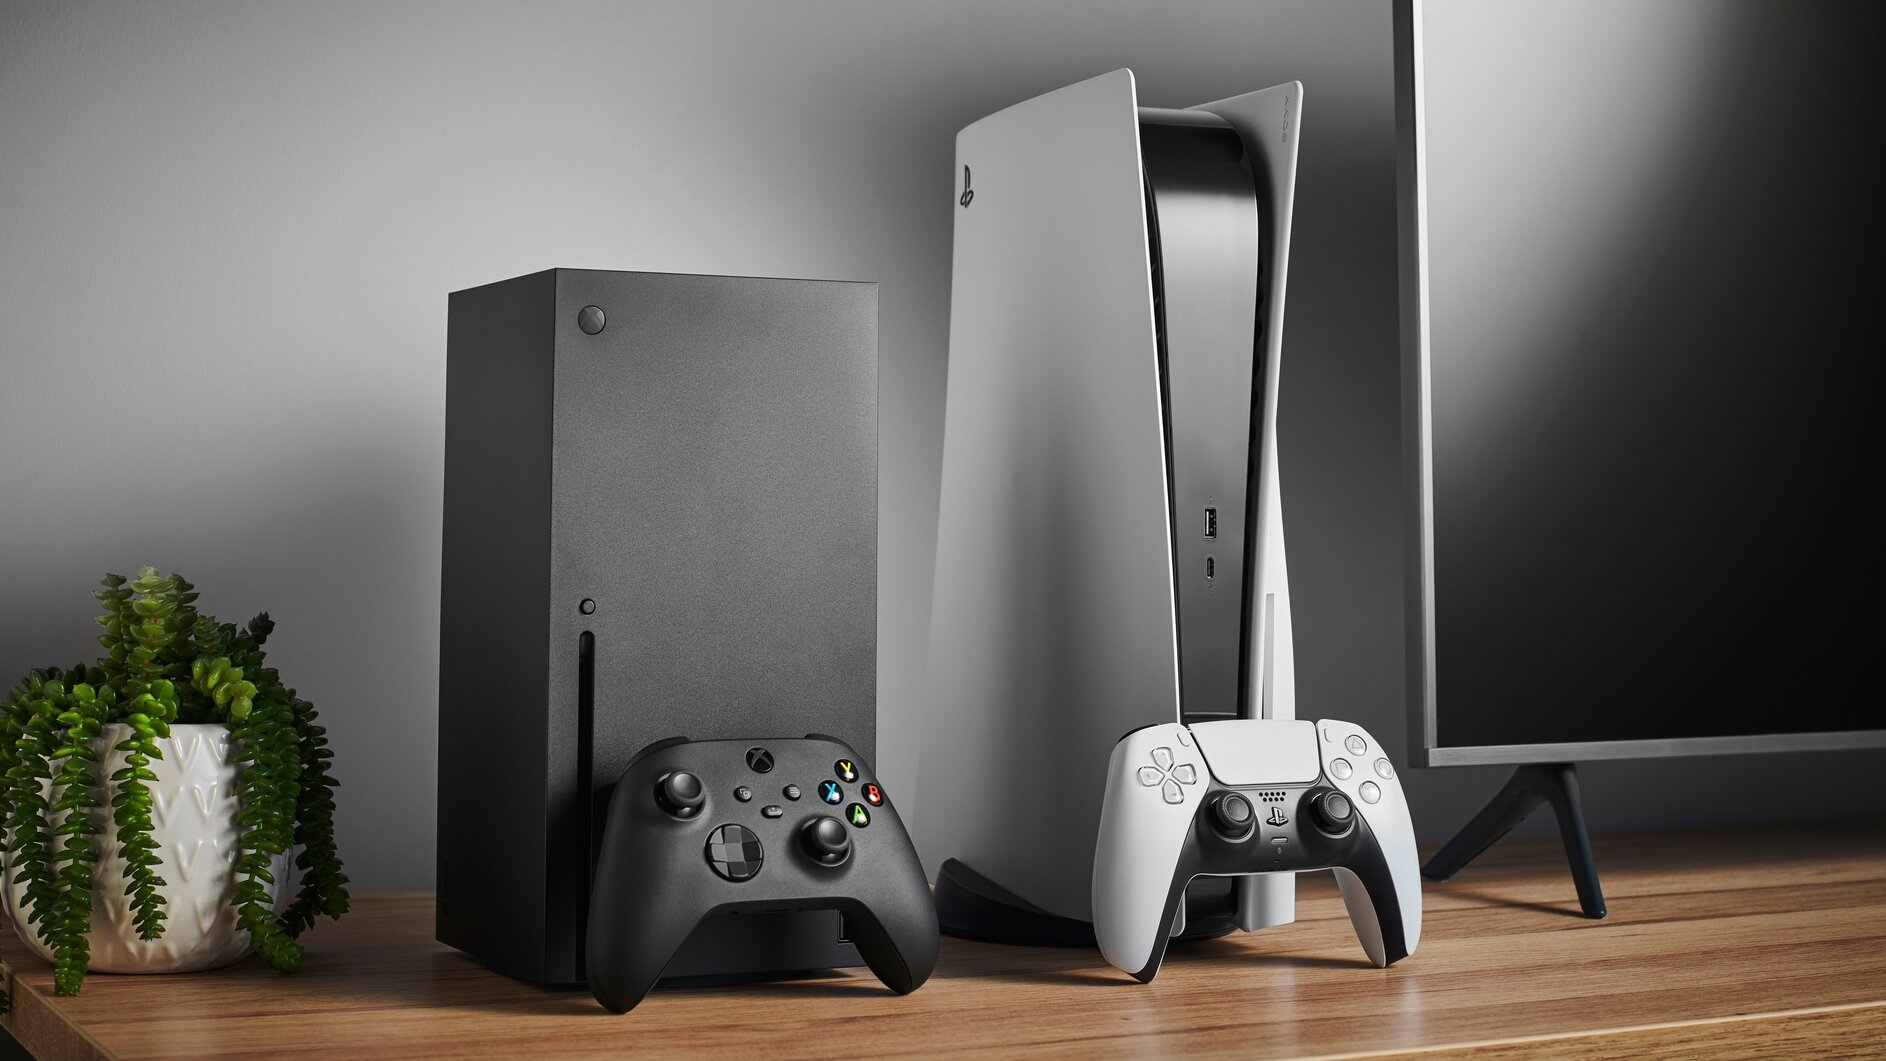 An image of both the Xbox Series X and PS5 on a home shelf